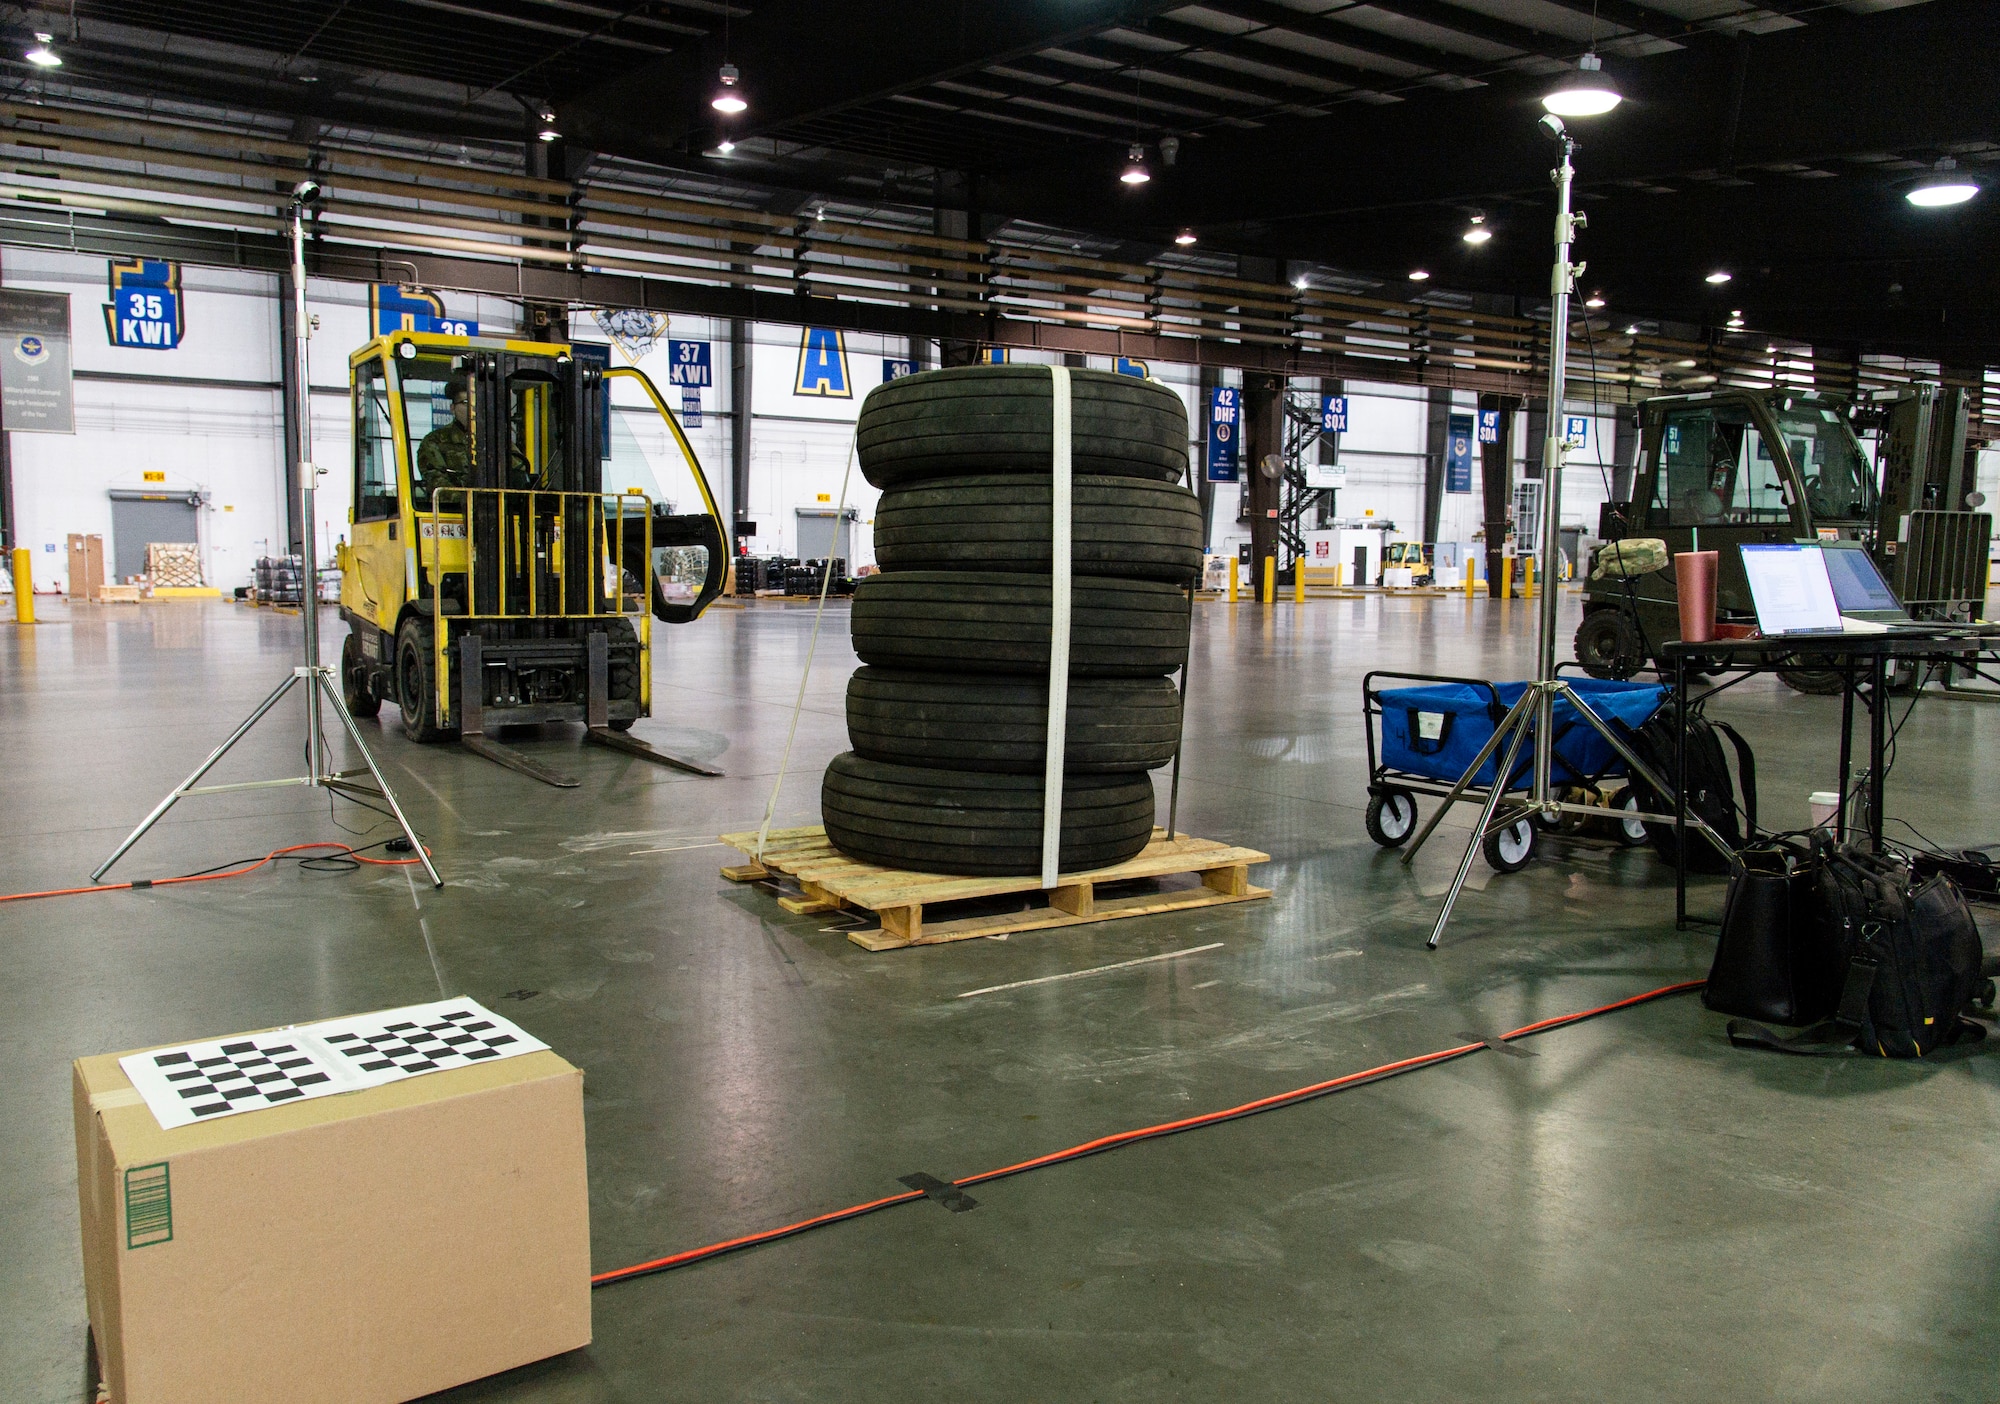 The Configured Air Load Building Tool system scans a pallet of tires during testing on Dover Air Force Base, Delaware, Nov. 17, 2021. In an effort to modernize the 2T2 career field as part of the Aerial Port of the Future initiative, the 436th Aerial Port Squadron was selected for CALBT testing due to its location and daily cargo movement. (U.S. Air Force photo by Roland Balik)